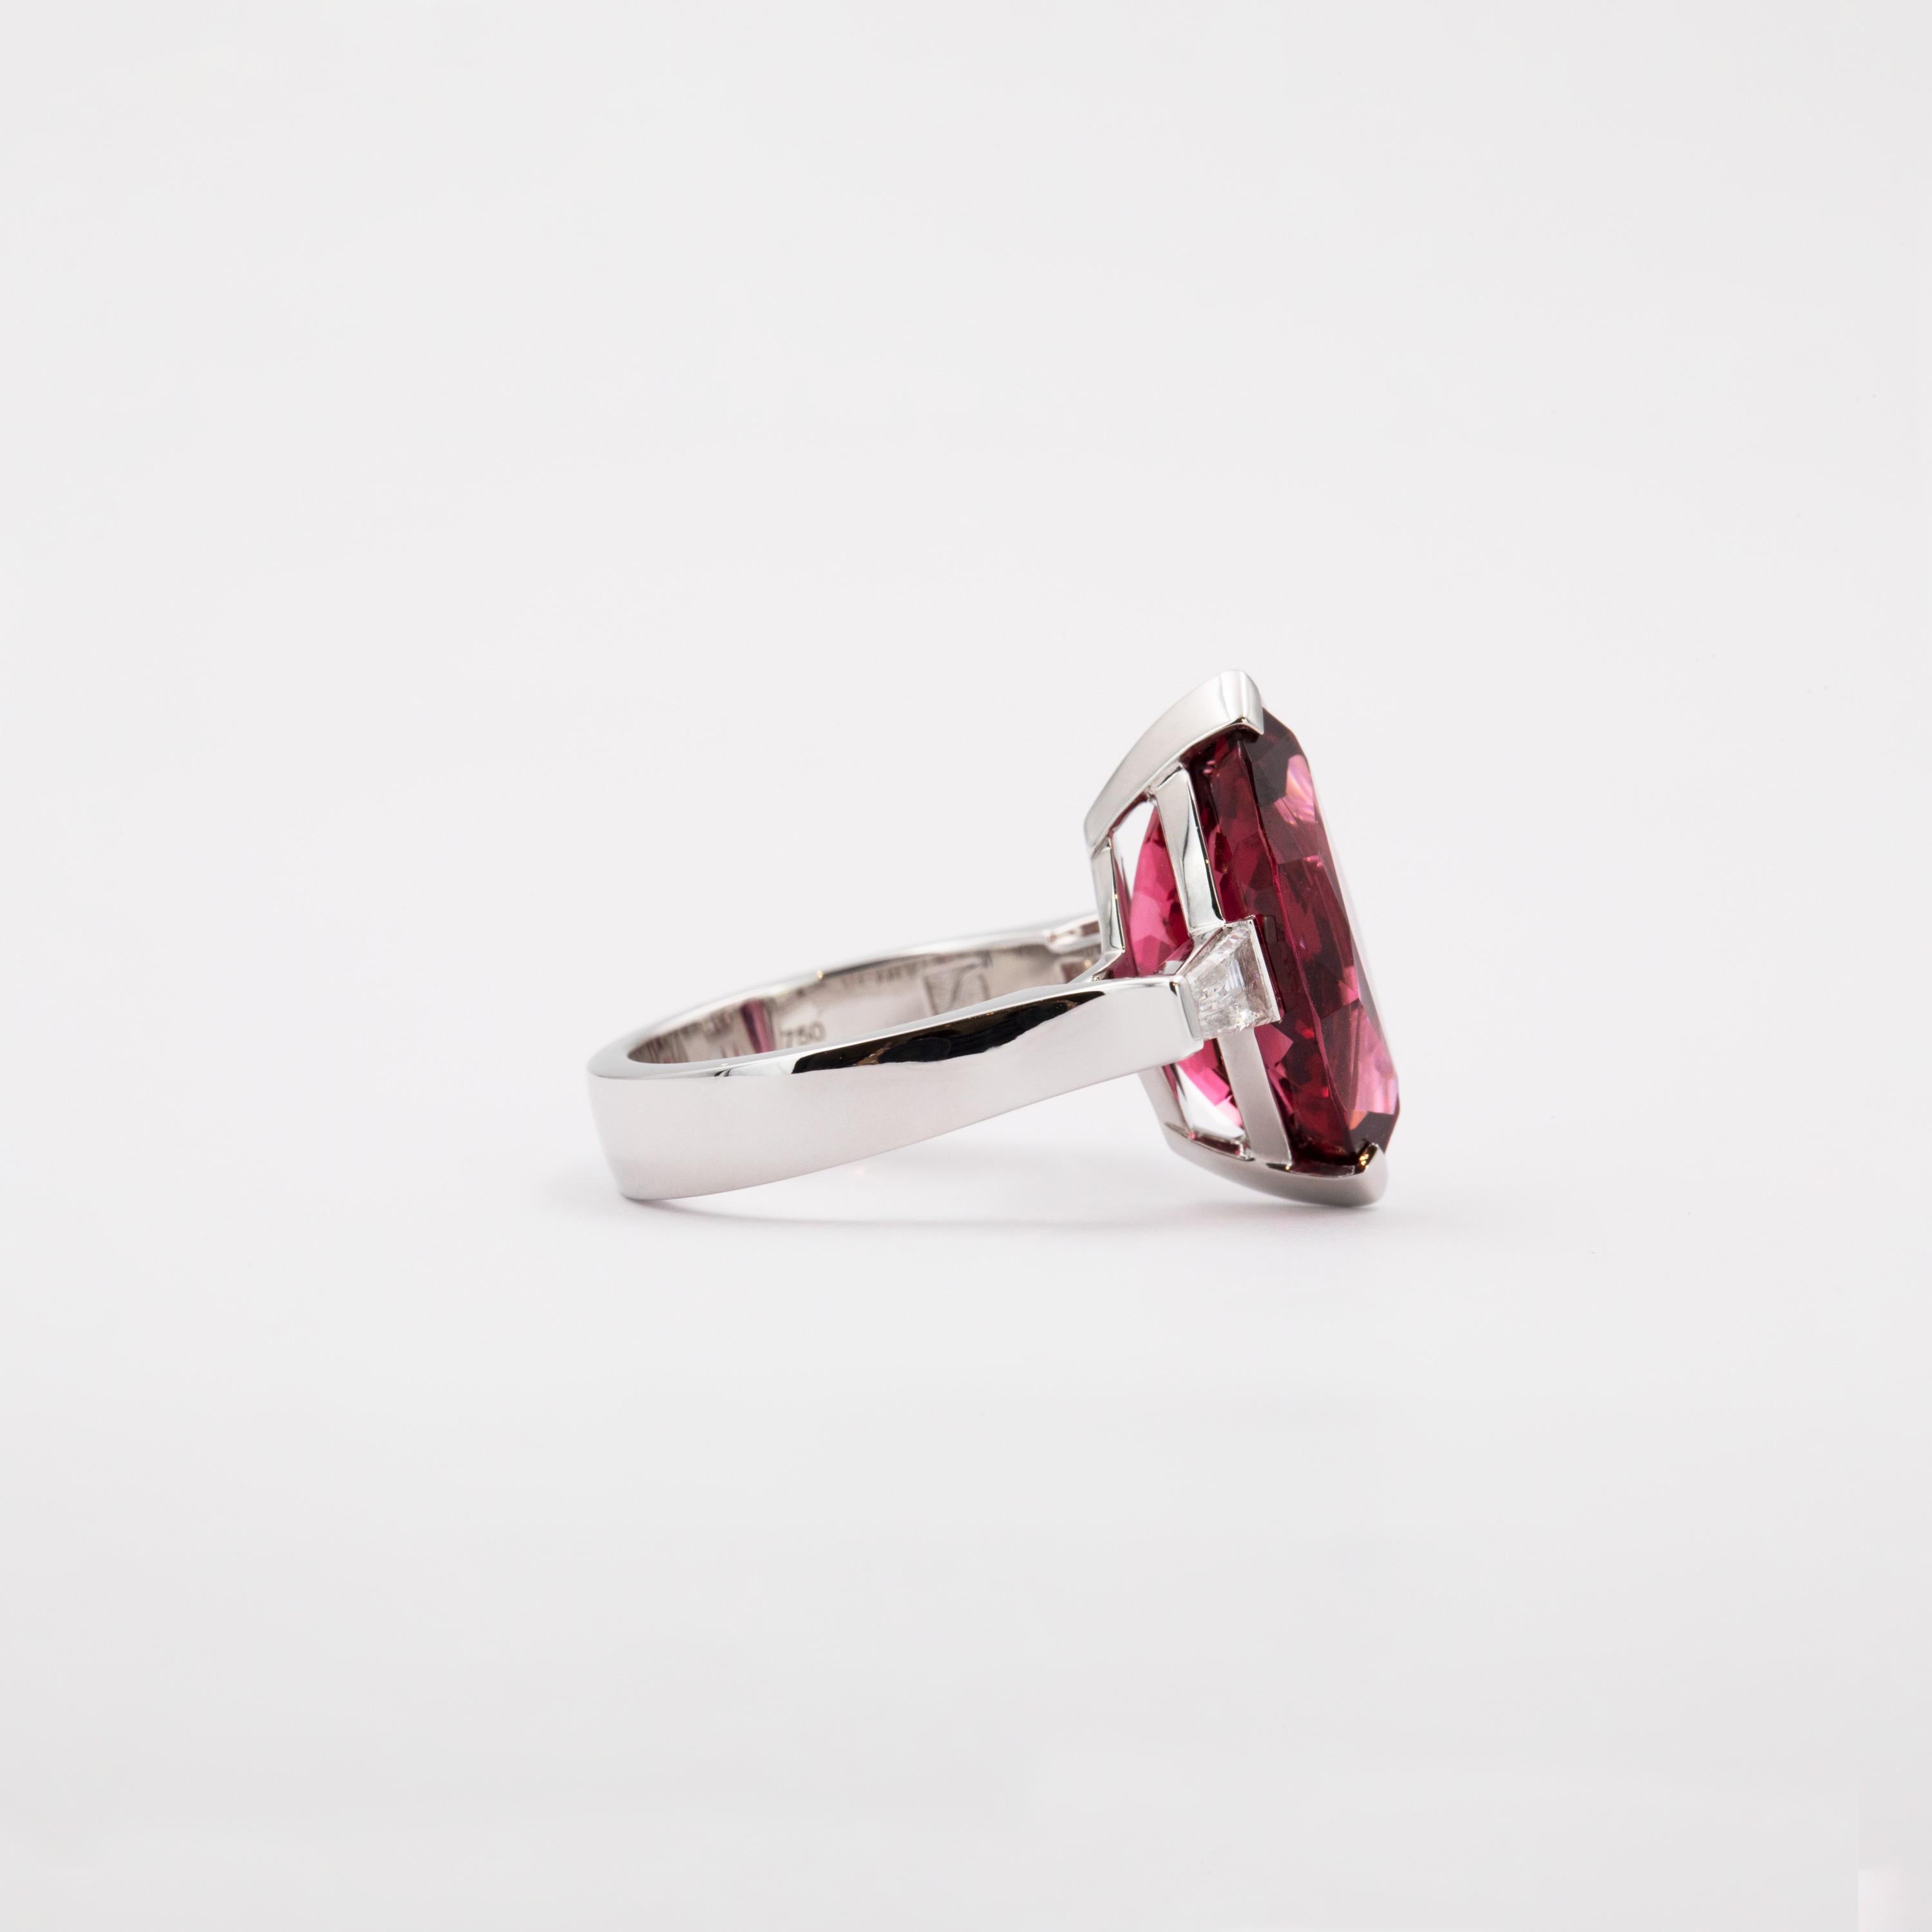 Tapered baguette diamonds weighing 0.59 carats ( F / VVS) complement the dynamic of this ring’s center-stone, set a steep angle to the 8.49 carat center stone. The vivid red spinel was sourced from Vietnam and is cut in a marquise shape. This